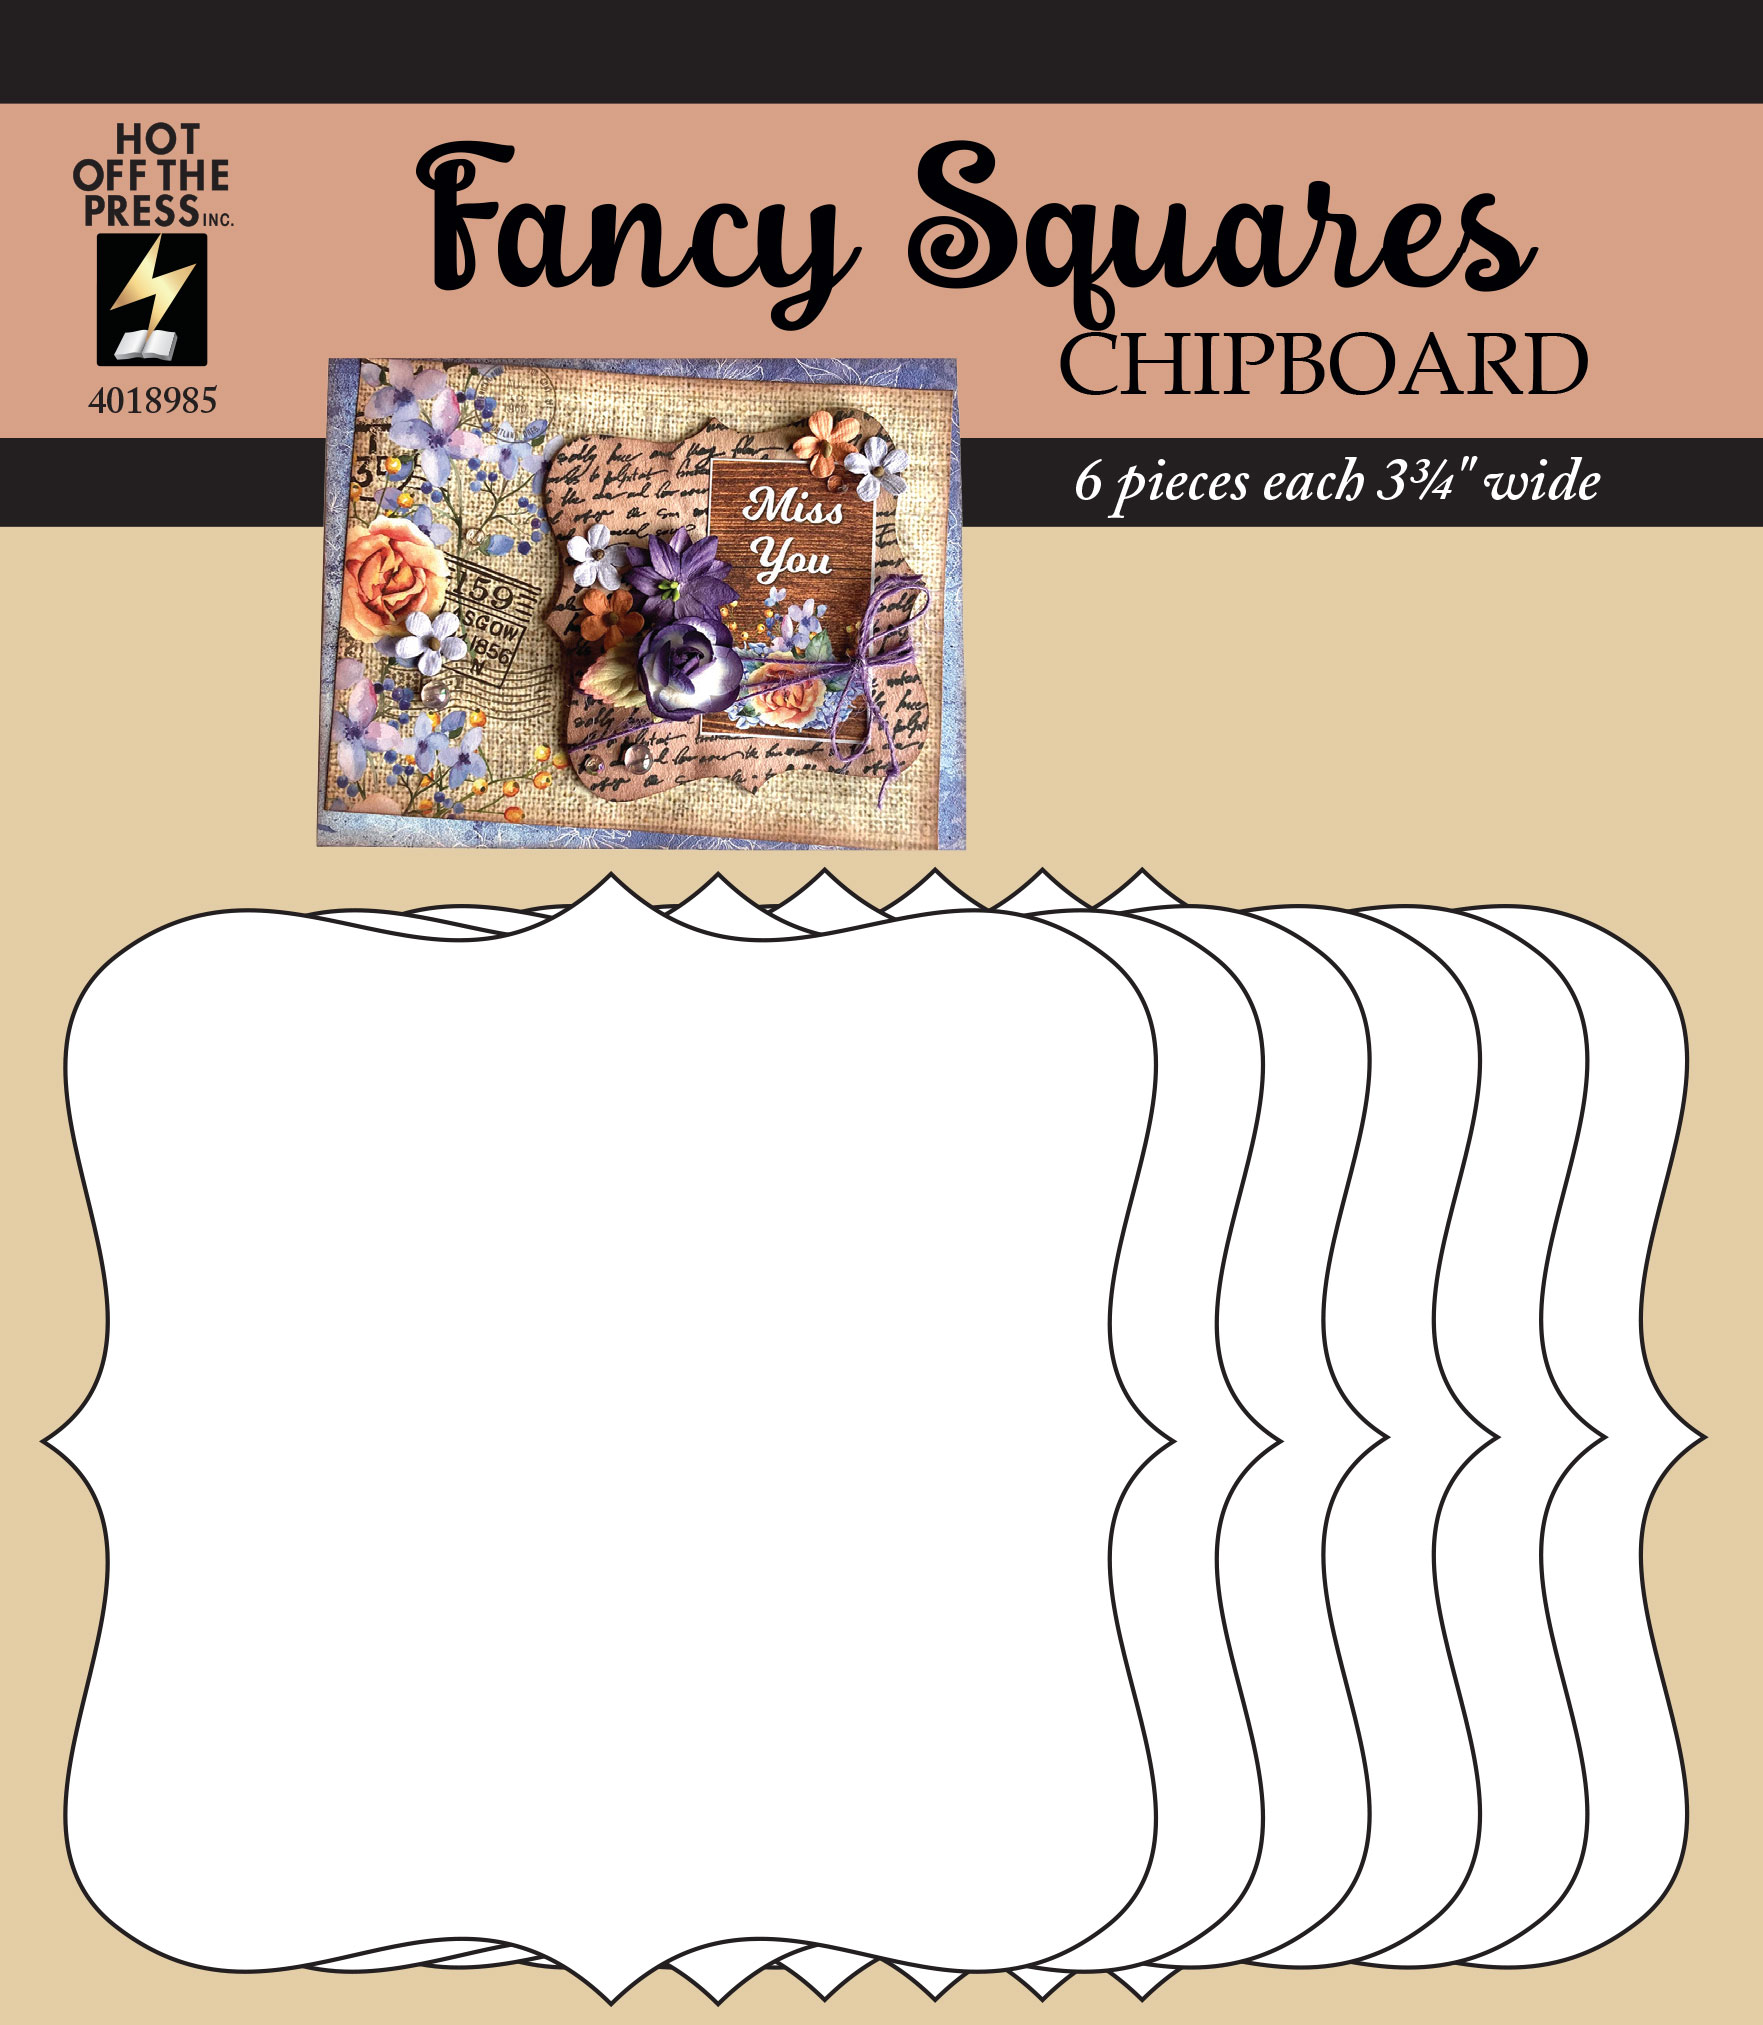 Fancy Square Chipboard, 6 pieces